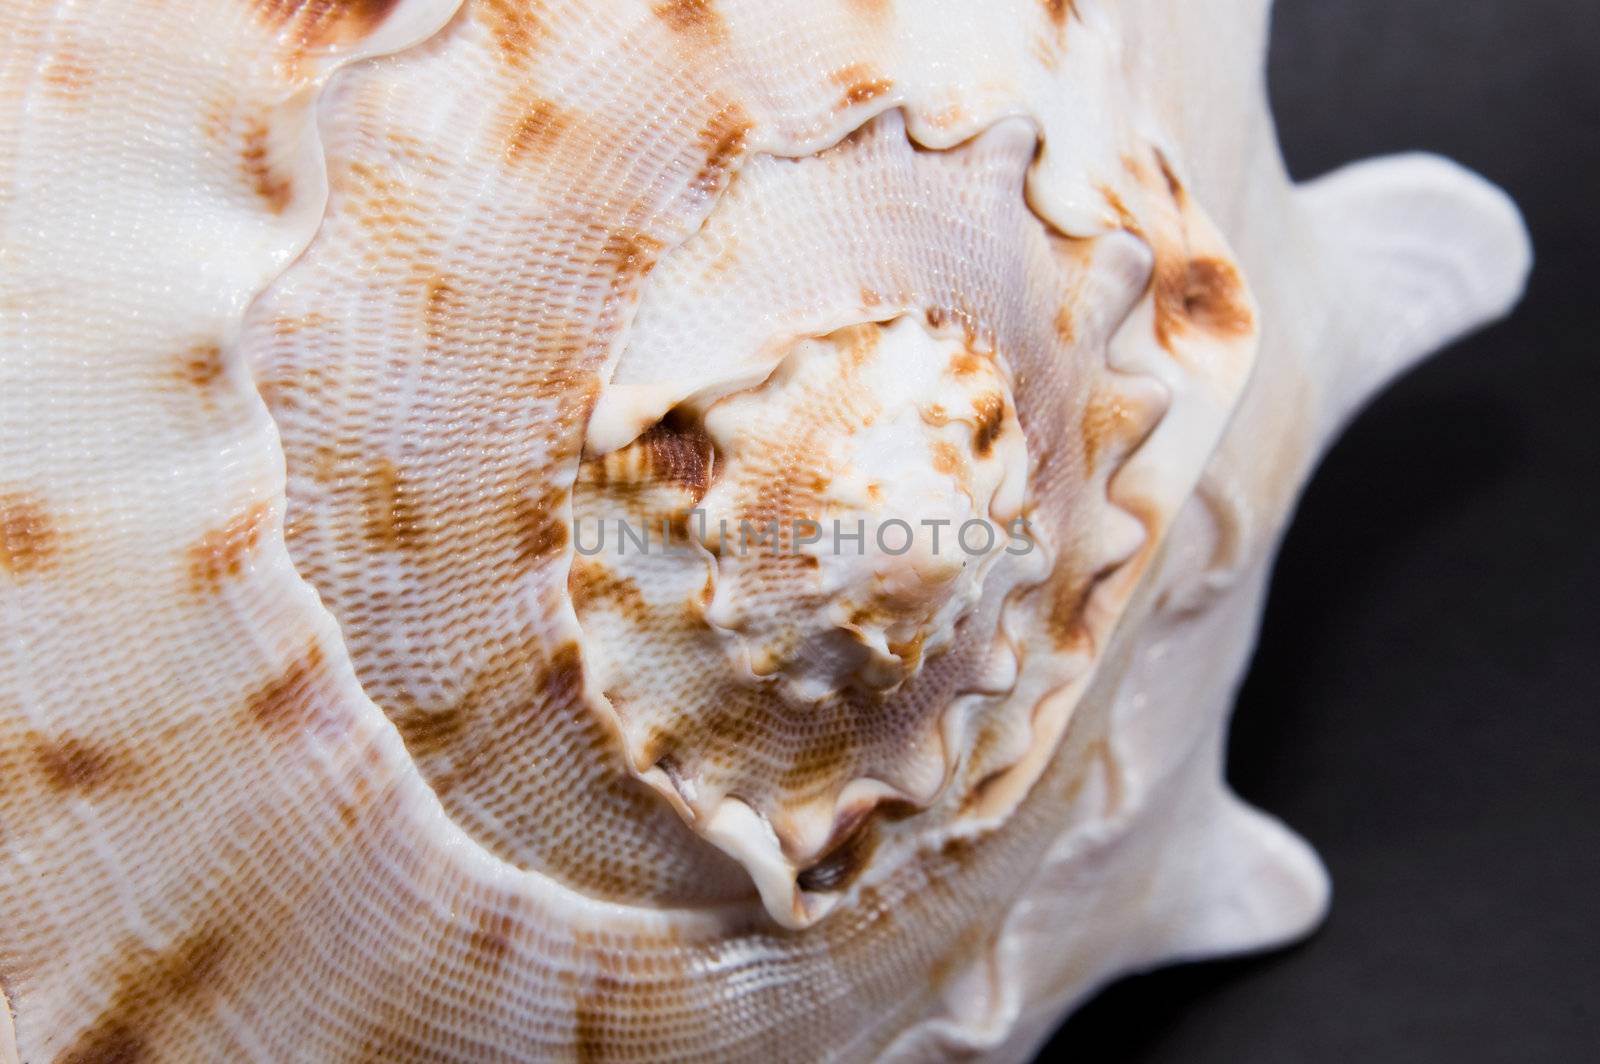 Close-up sea shell on black background.